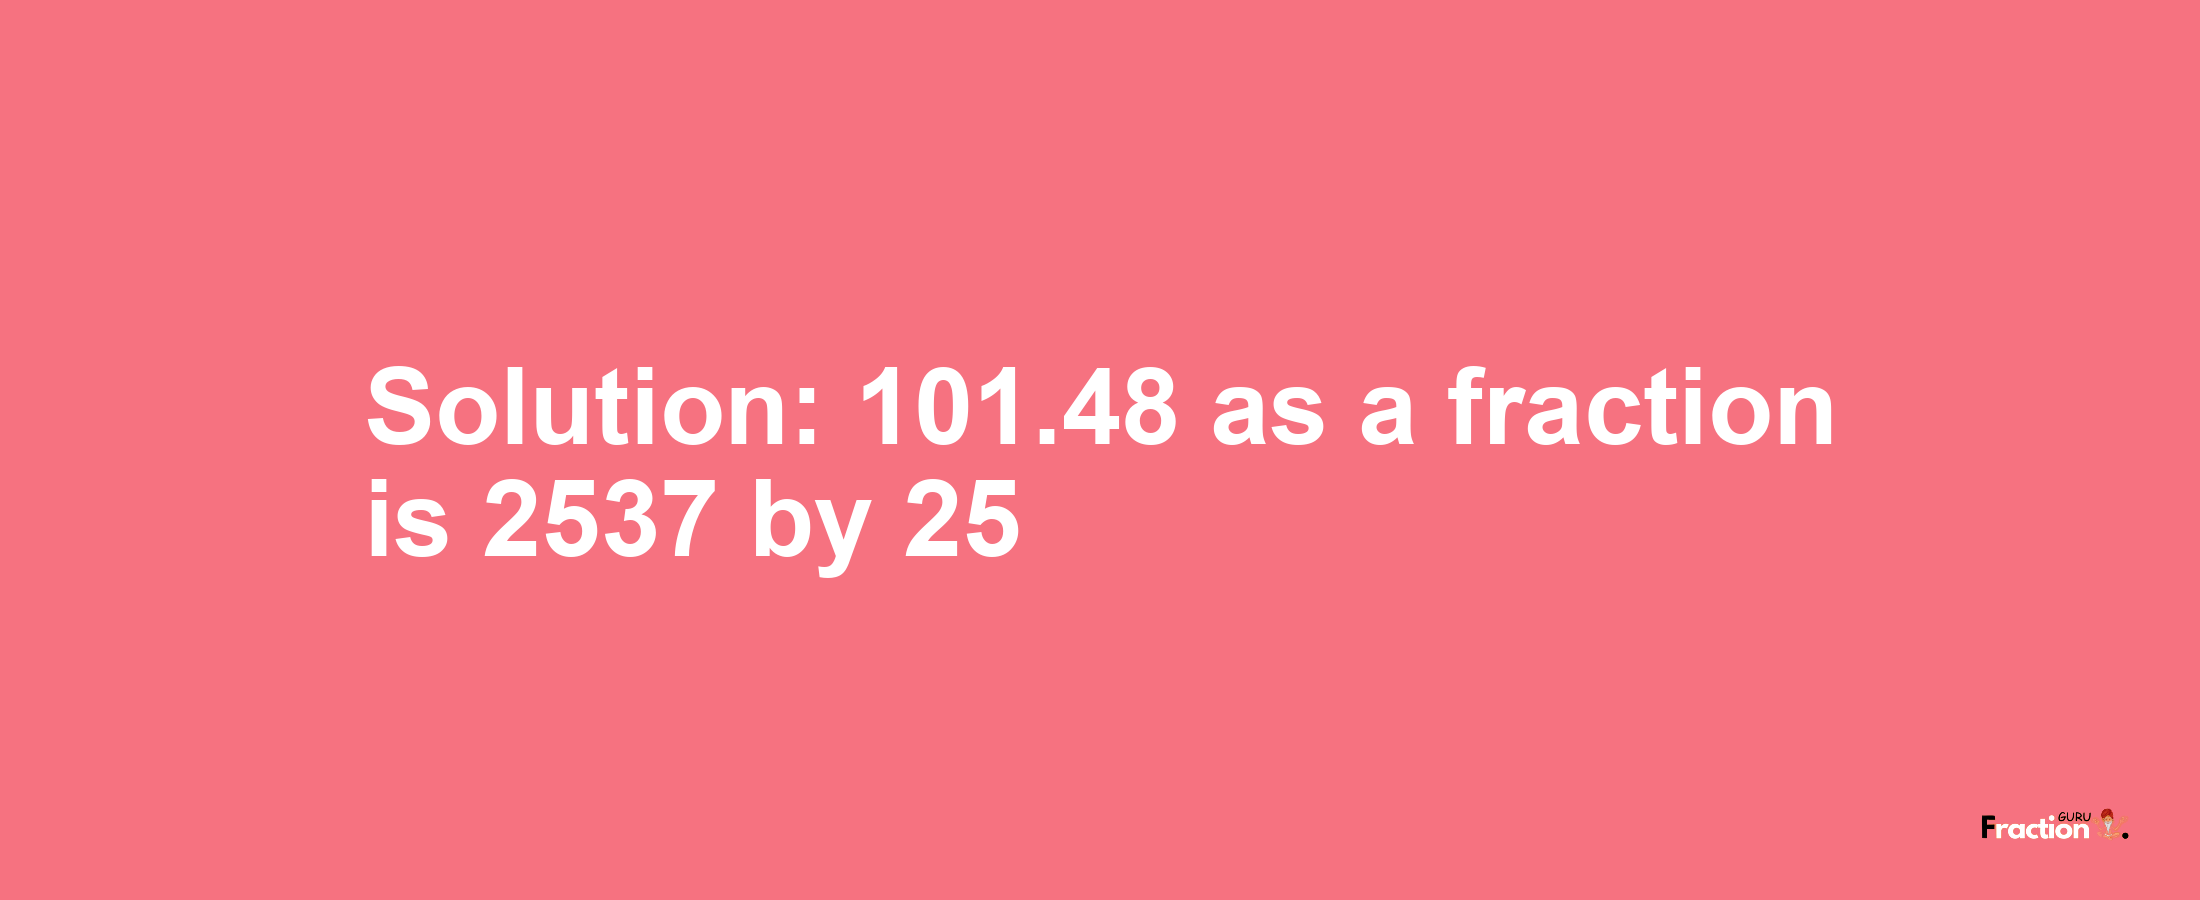 Solution:101.48 as a fraction is 2537/25